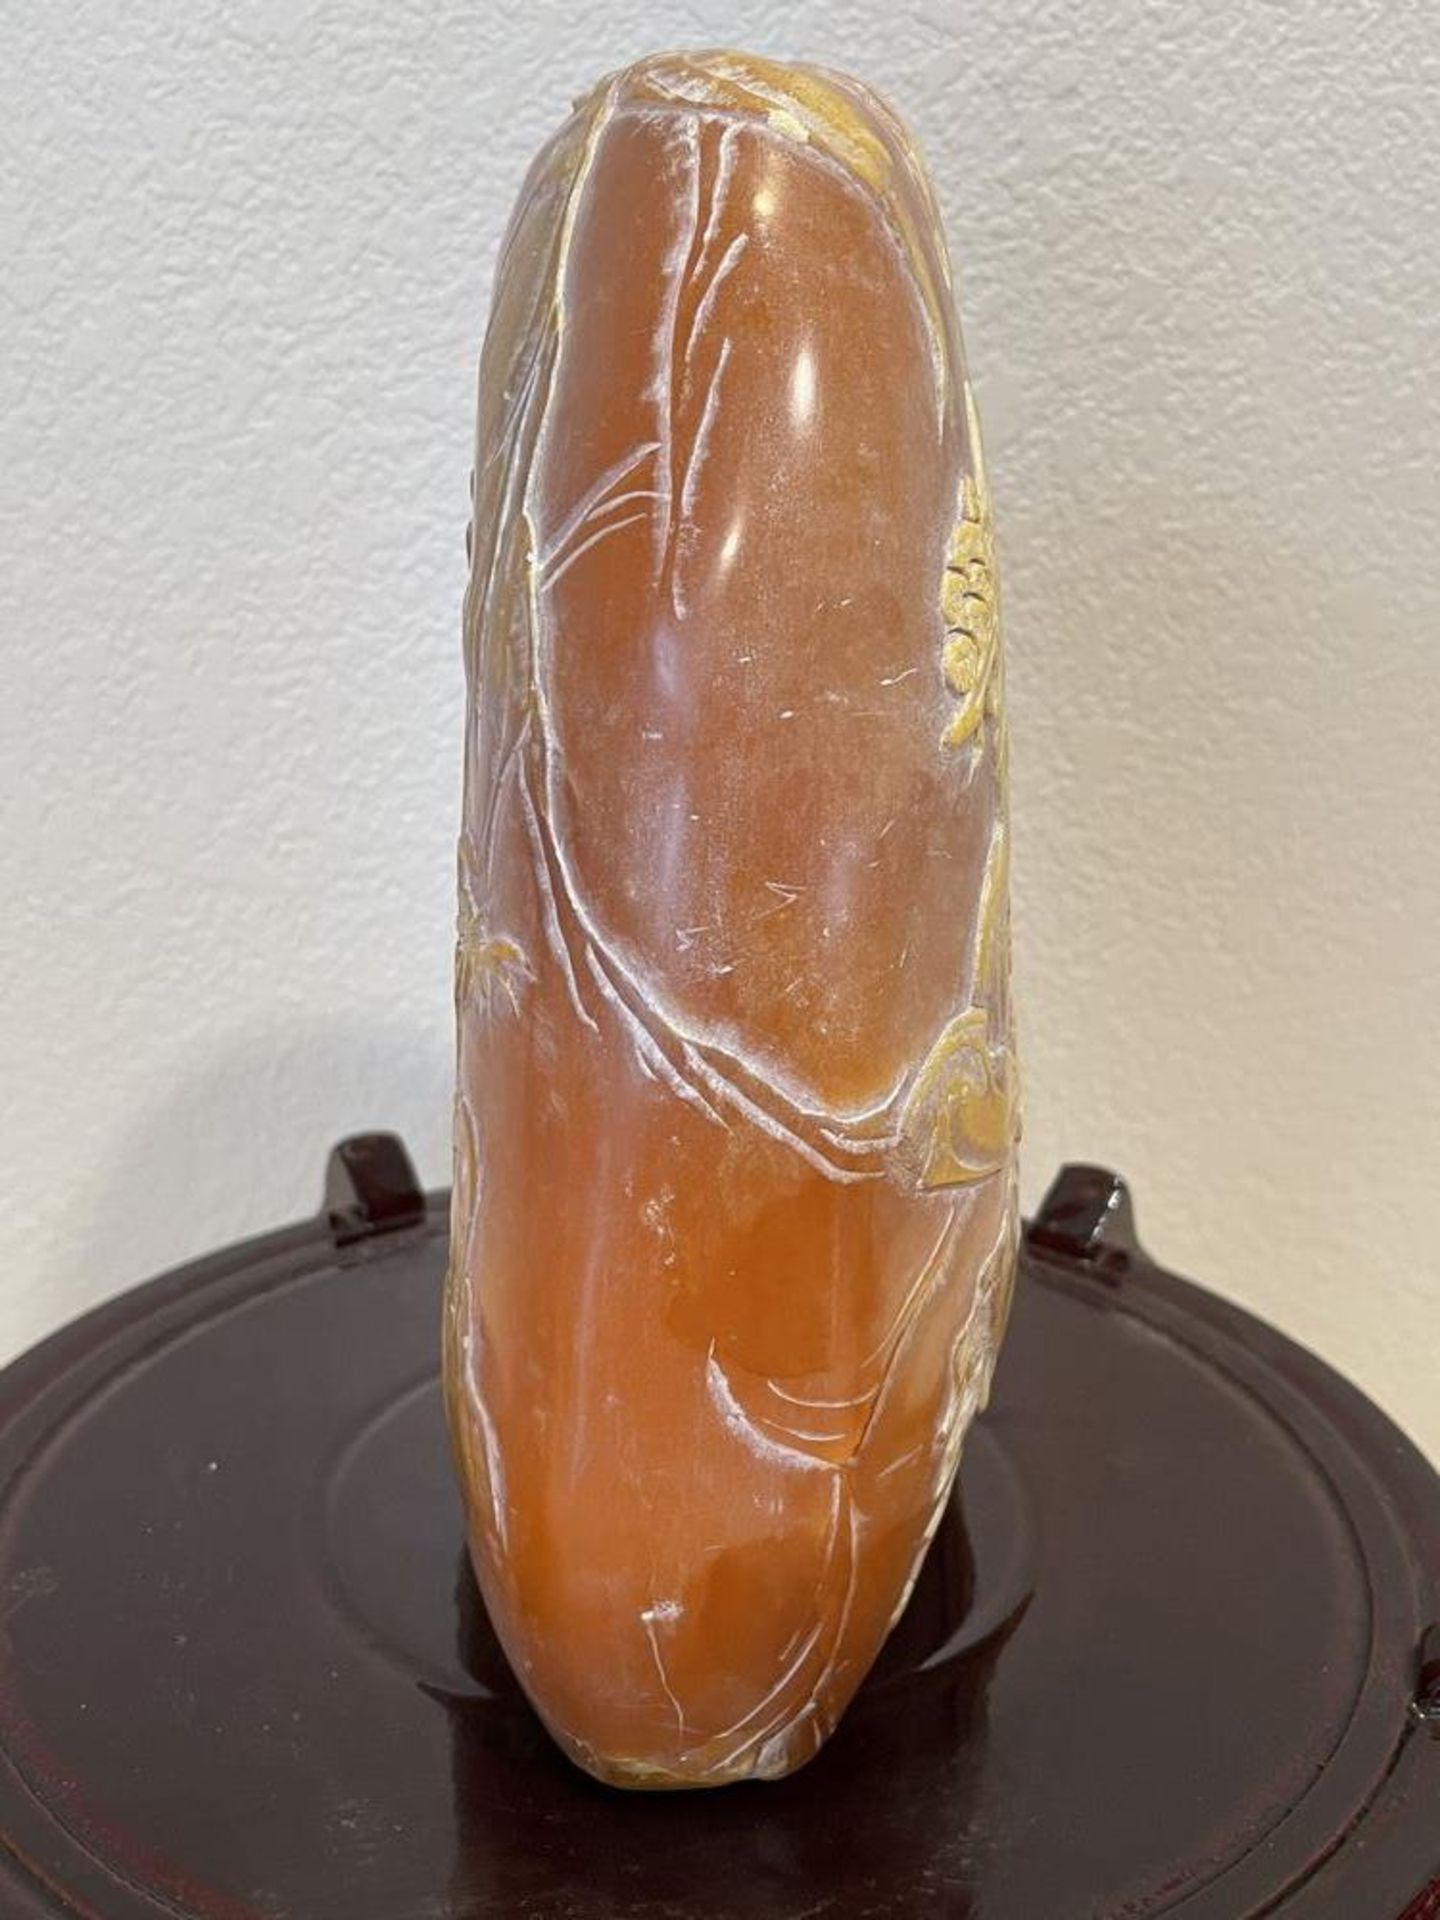 Orange/Amber Color East Asian Stone Sculpture on wood stand, Heavy/Cold Stone - Image 6 of 7